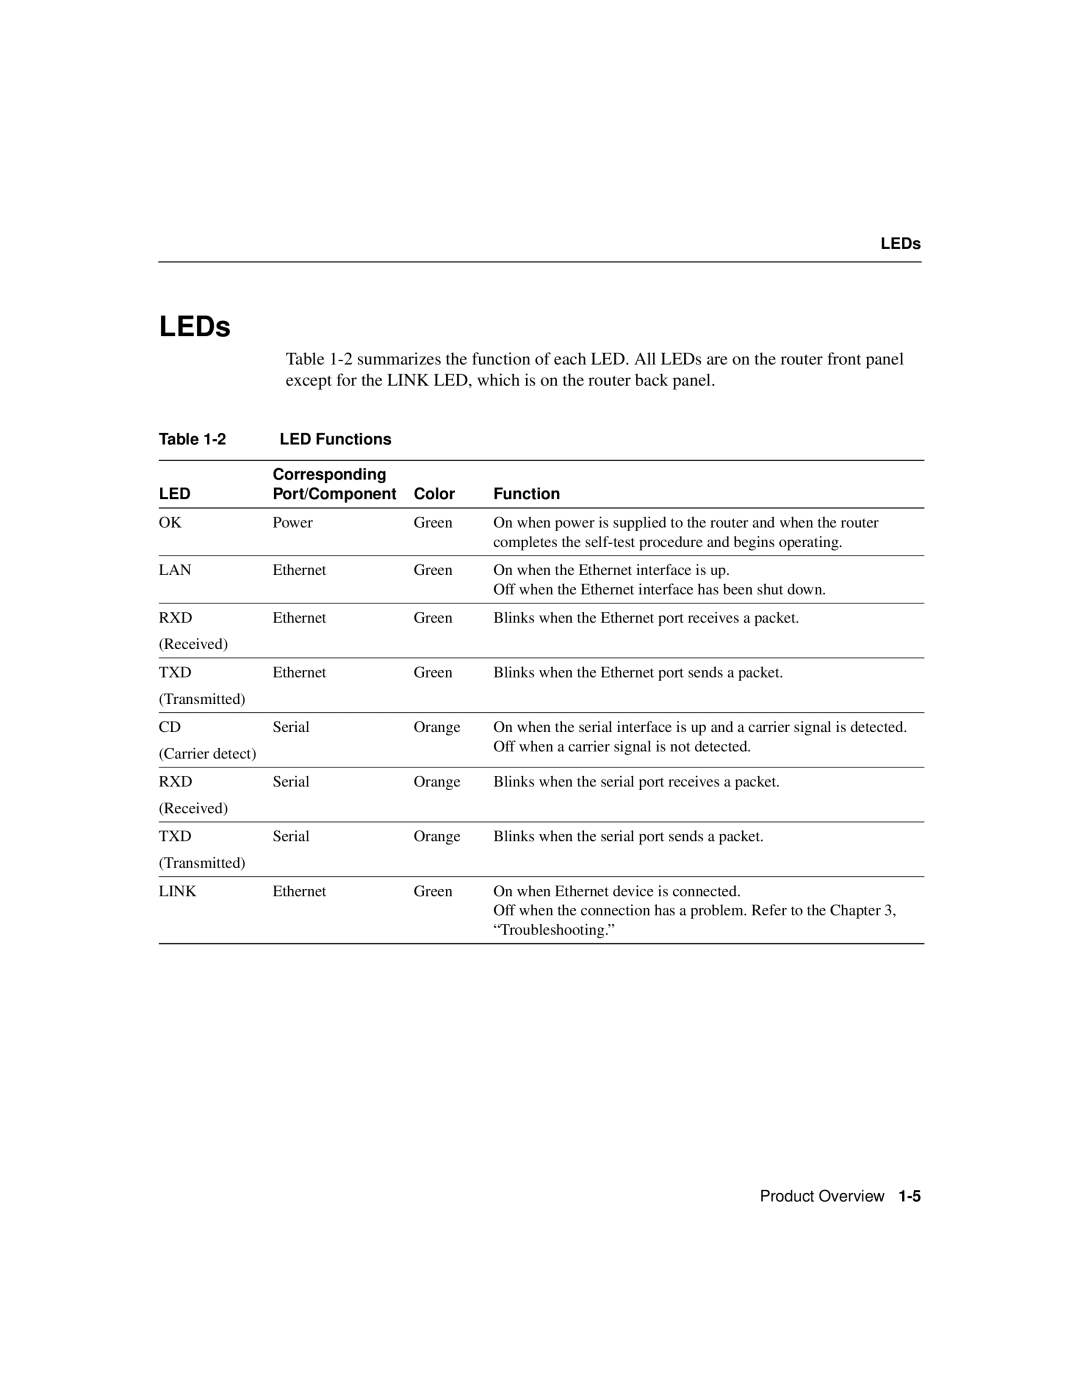 Cisco Systems CISCO805 manual LEDs, LED Functions, Corresponding, Port/Component, Color 